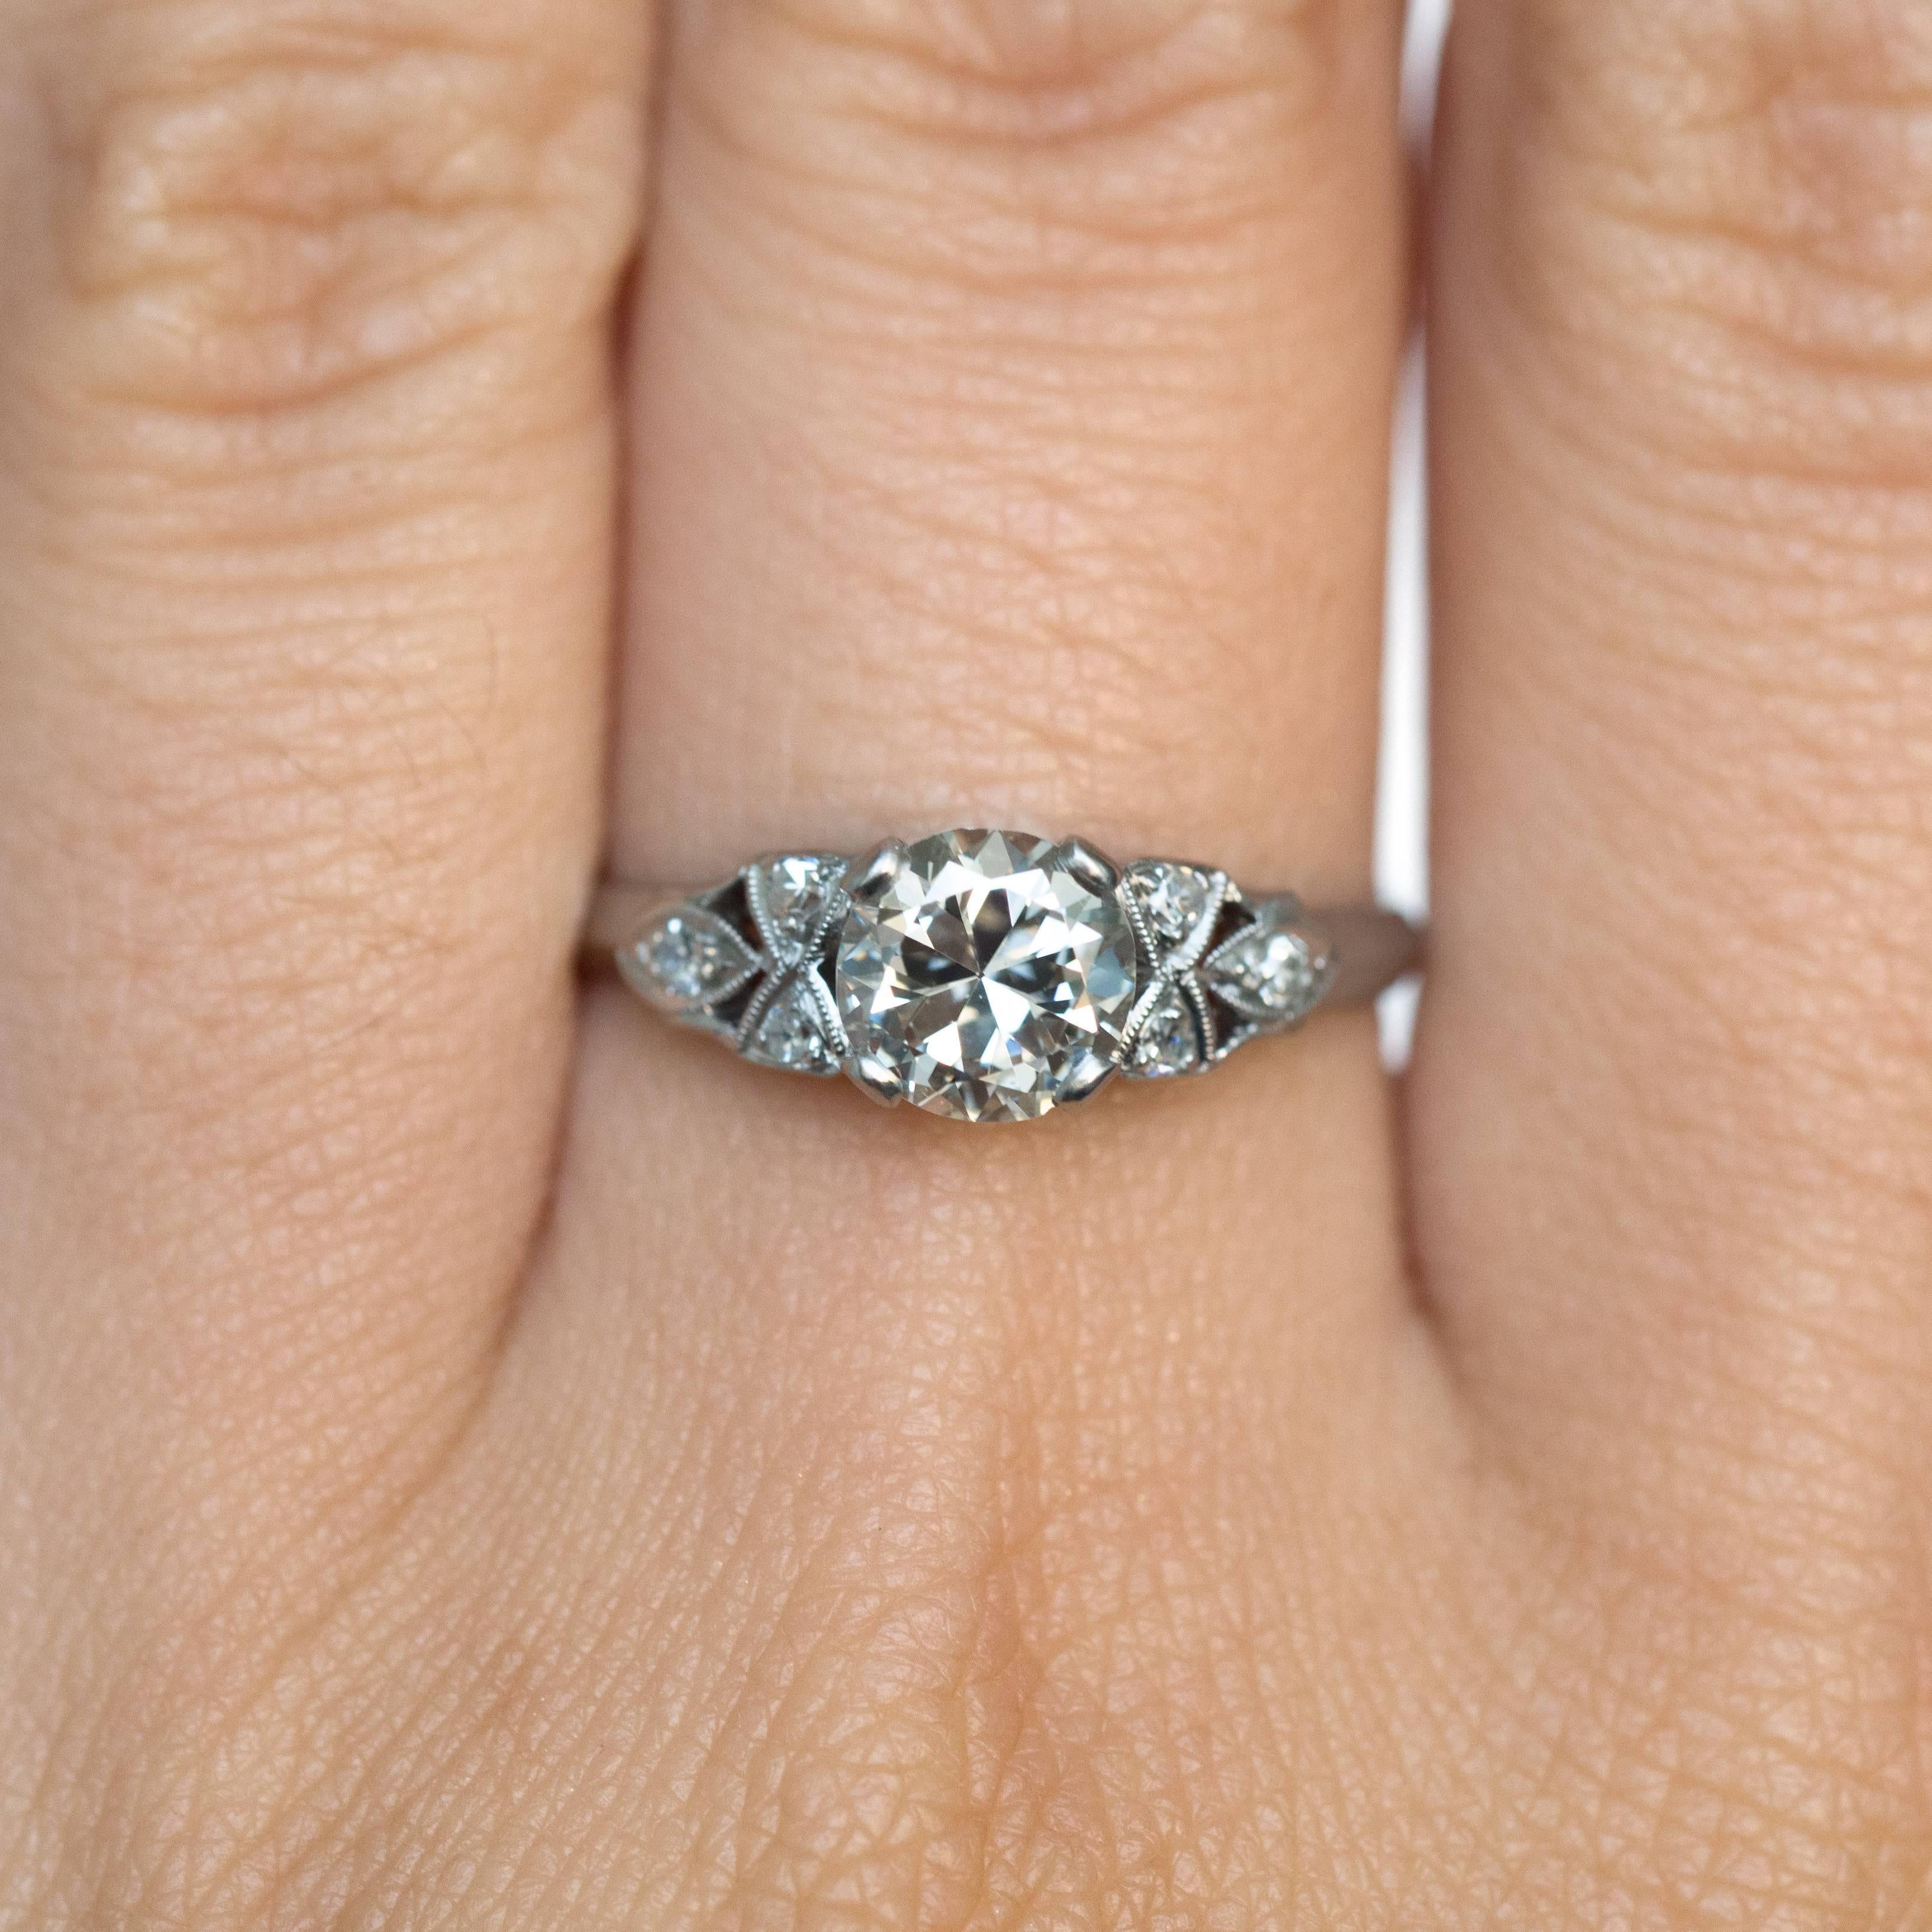 GIA Certified 0.87 Carat Diamond Platinum Engagement Ring In Excellent Condition For Sale In Atlanta, GA